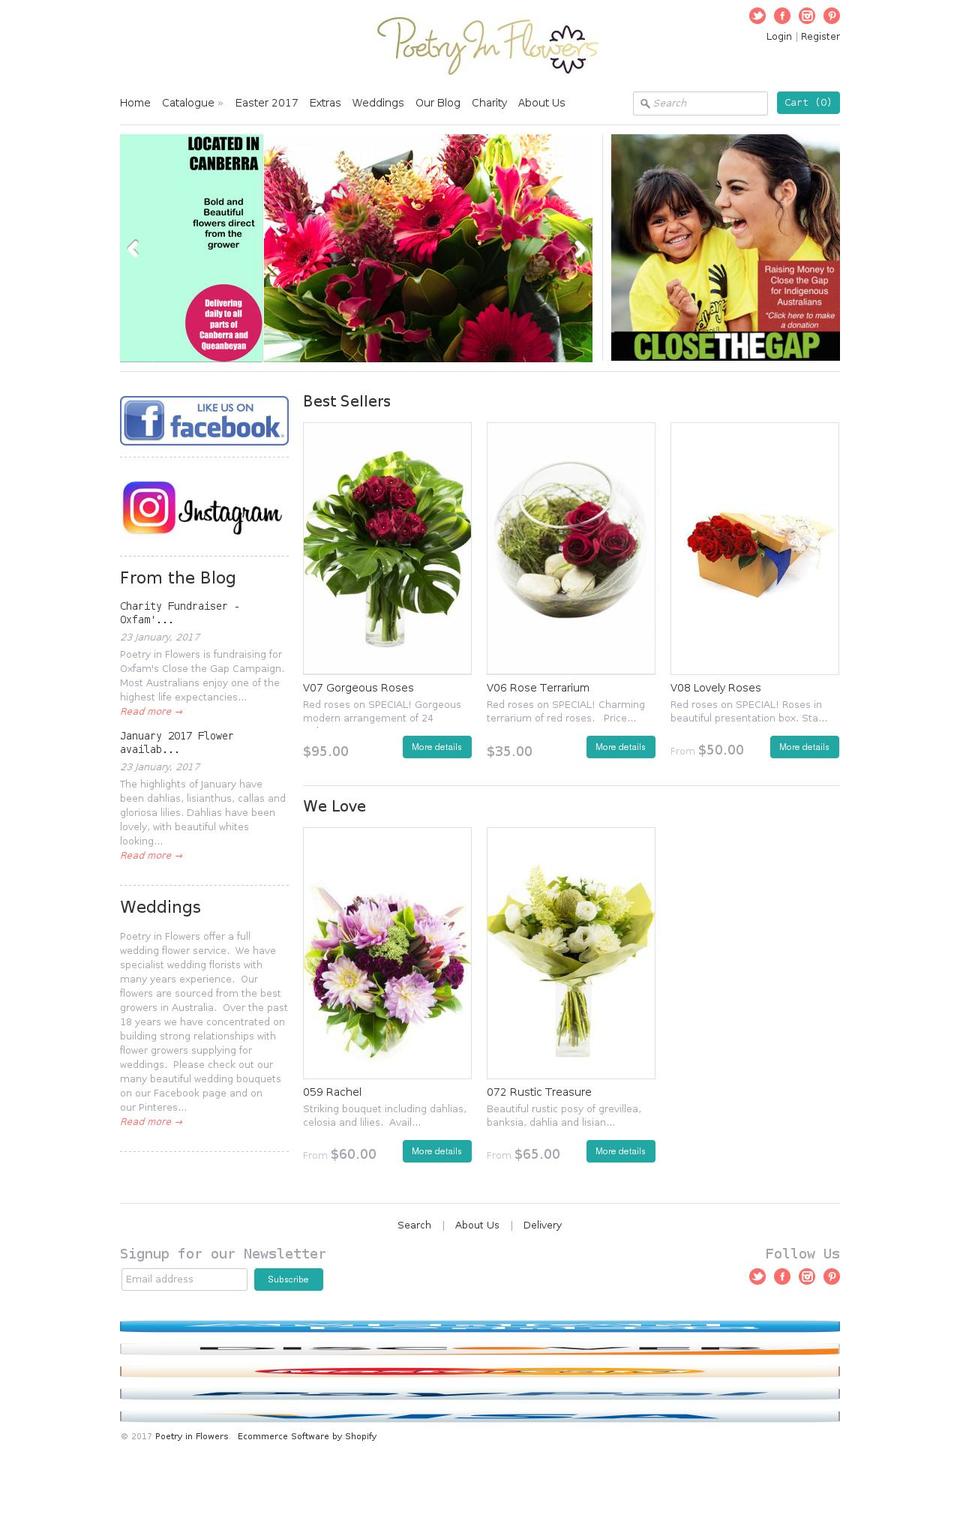 Grid Shopify theme site example poetryinflowers.com.au